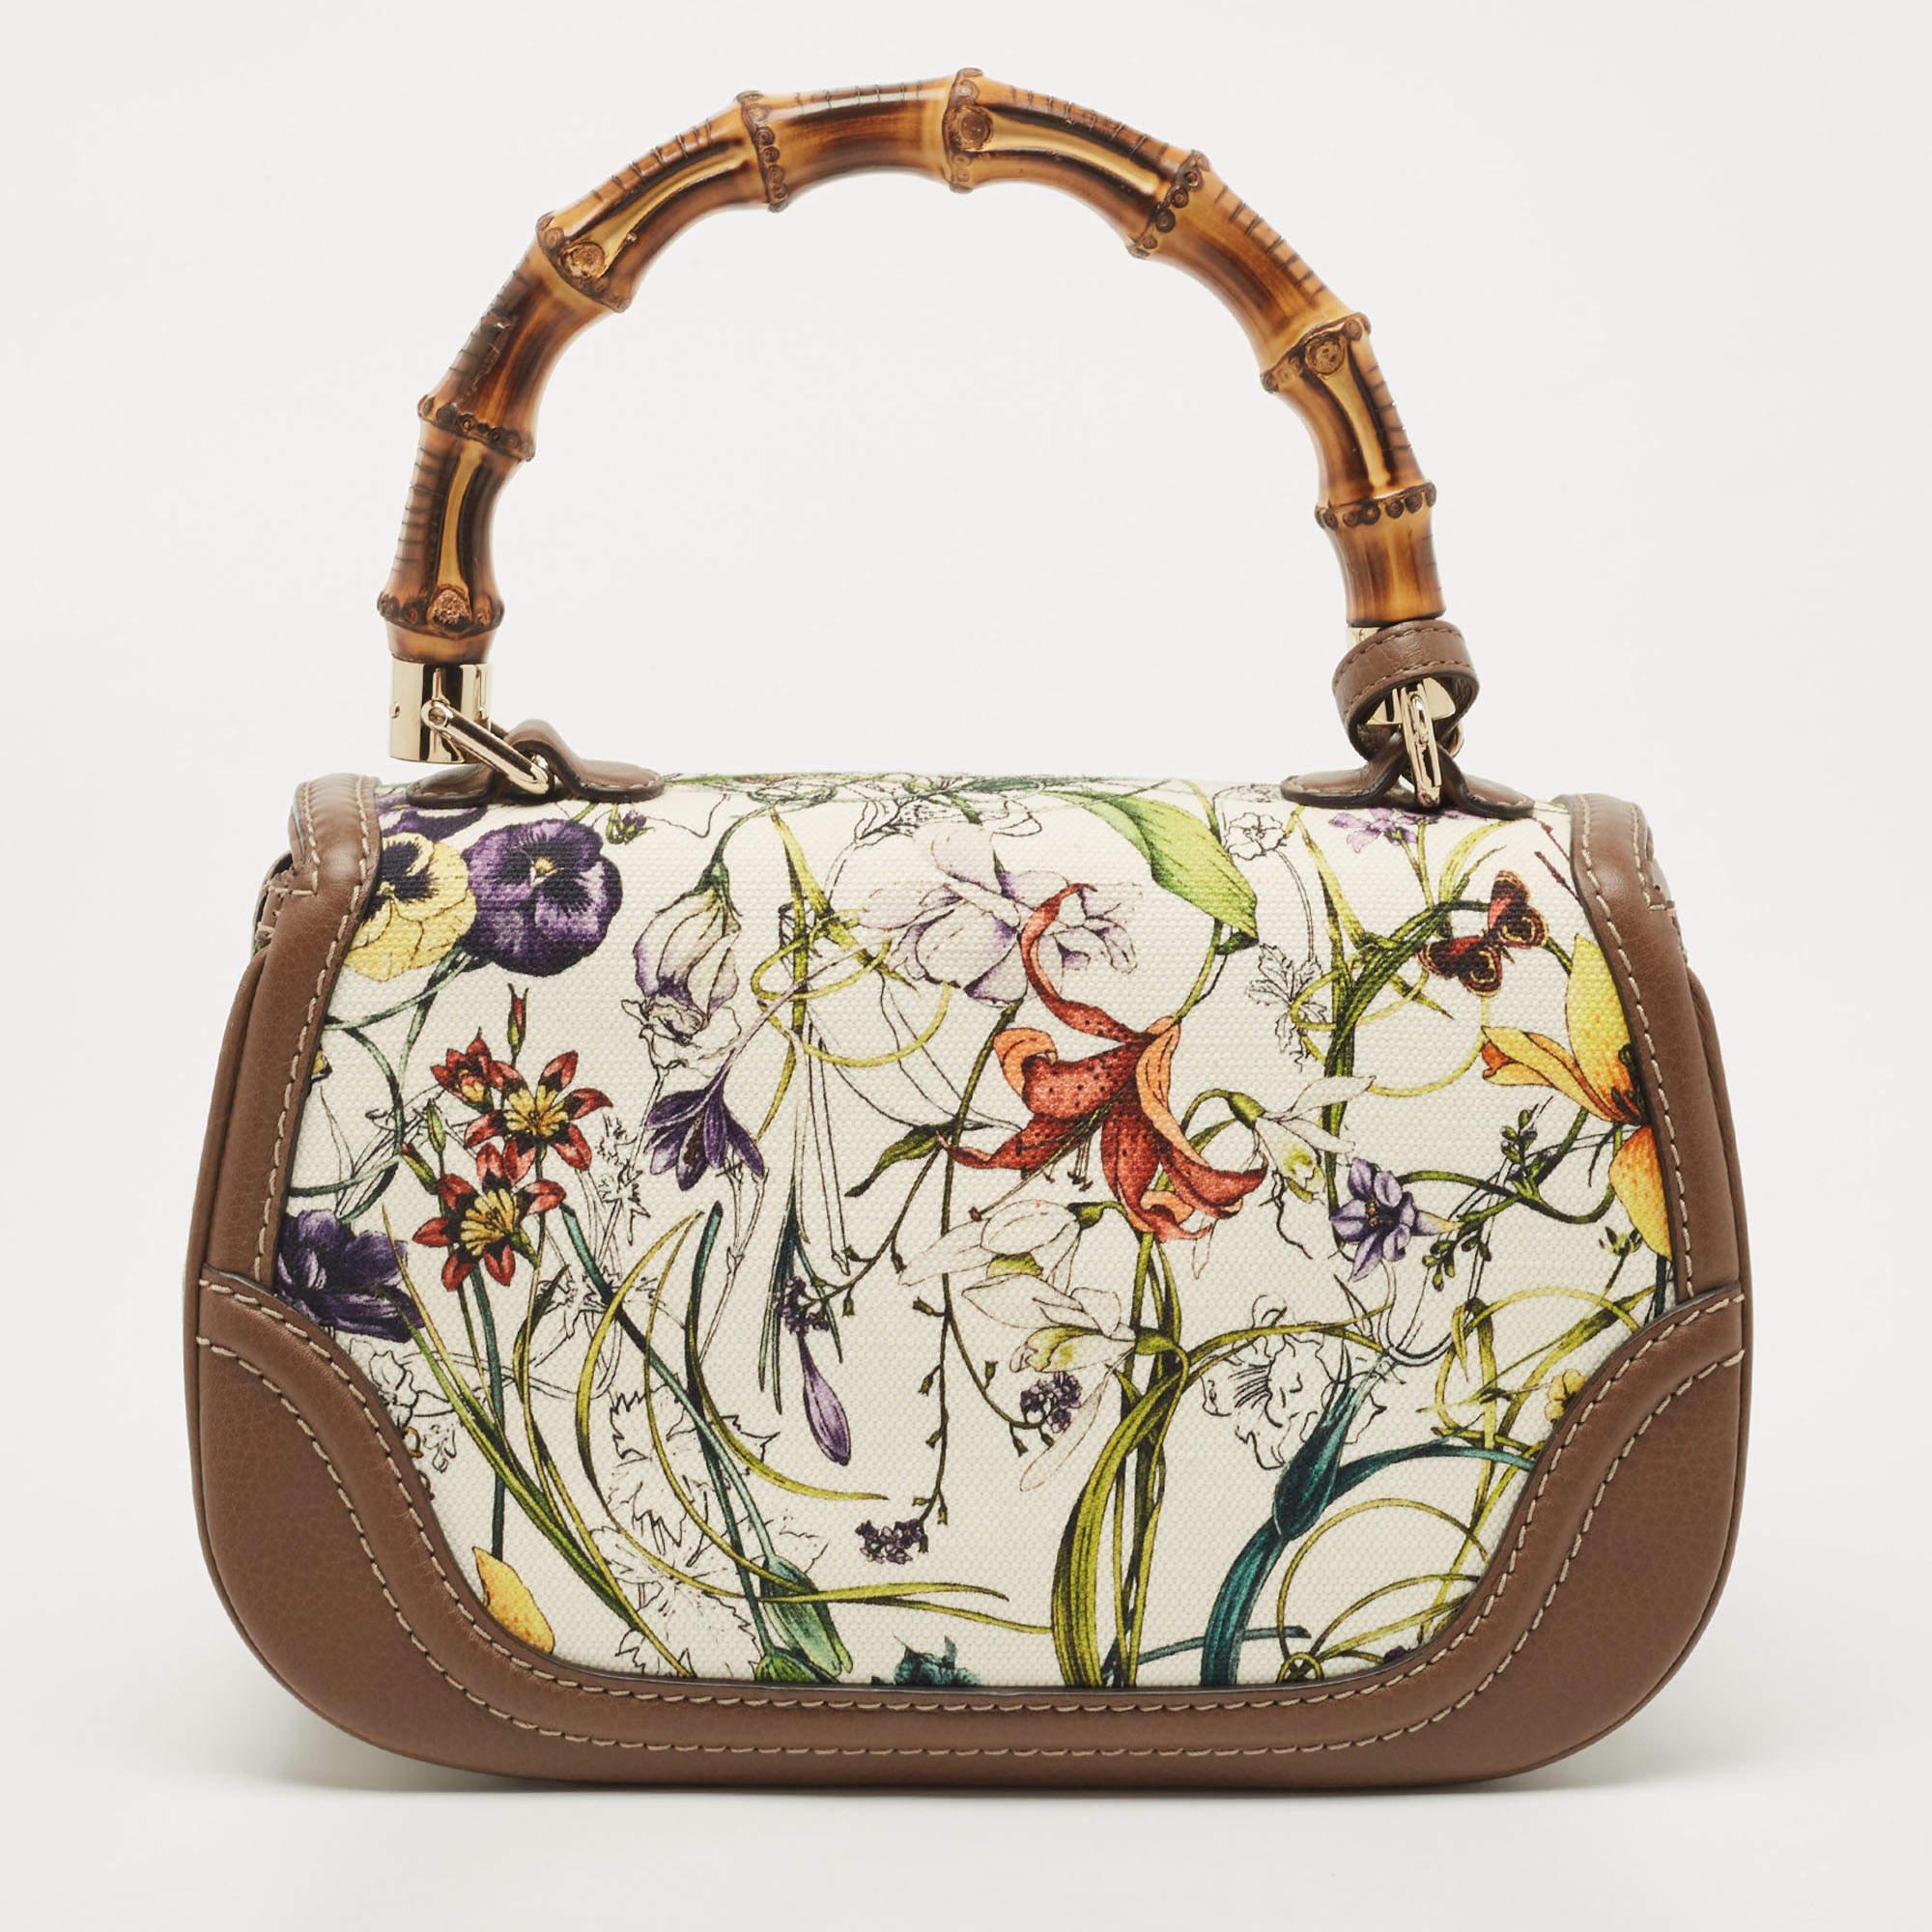 This New Bamboo Gucci bag combines style and elegance into the ultimate everyday bag. Crafted from floral canvas and leather, it is accented with a signature bamboo top handle. Secured with a bamboo lock closure, the interior is lined with canvas